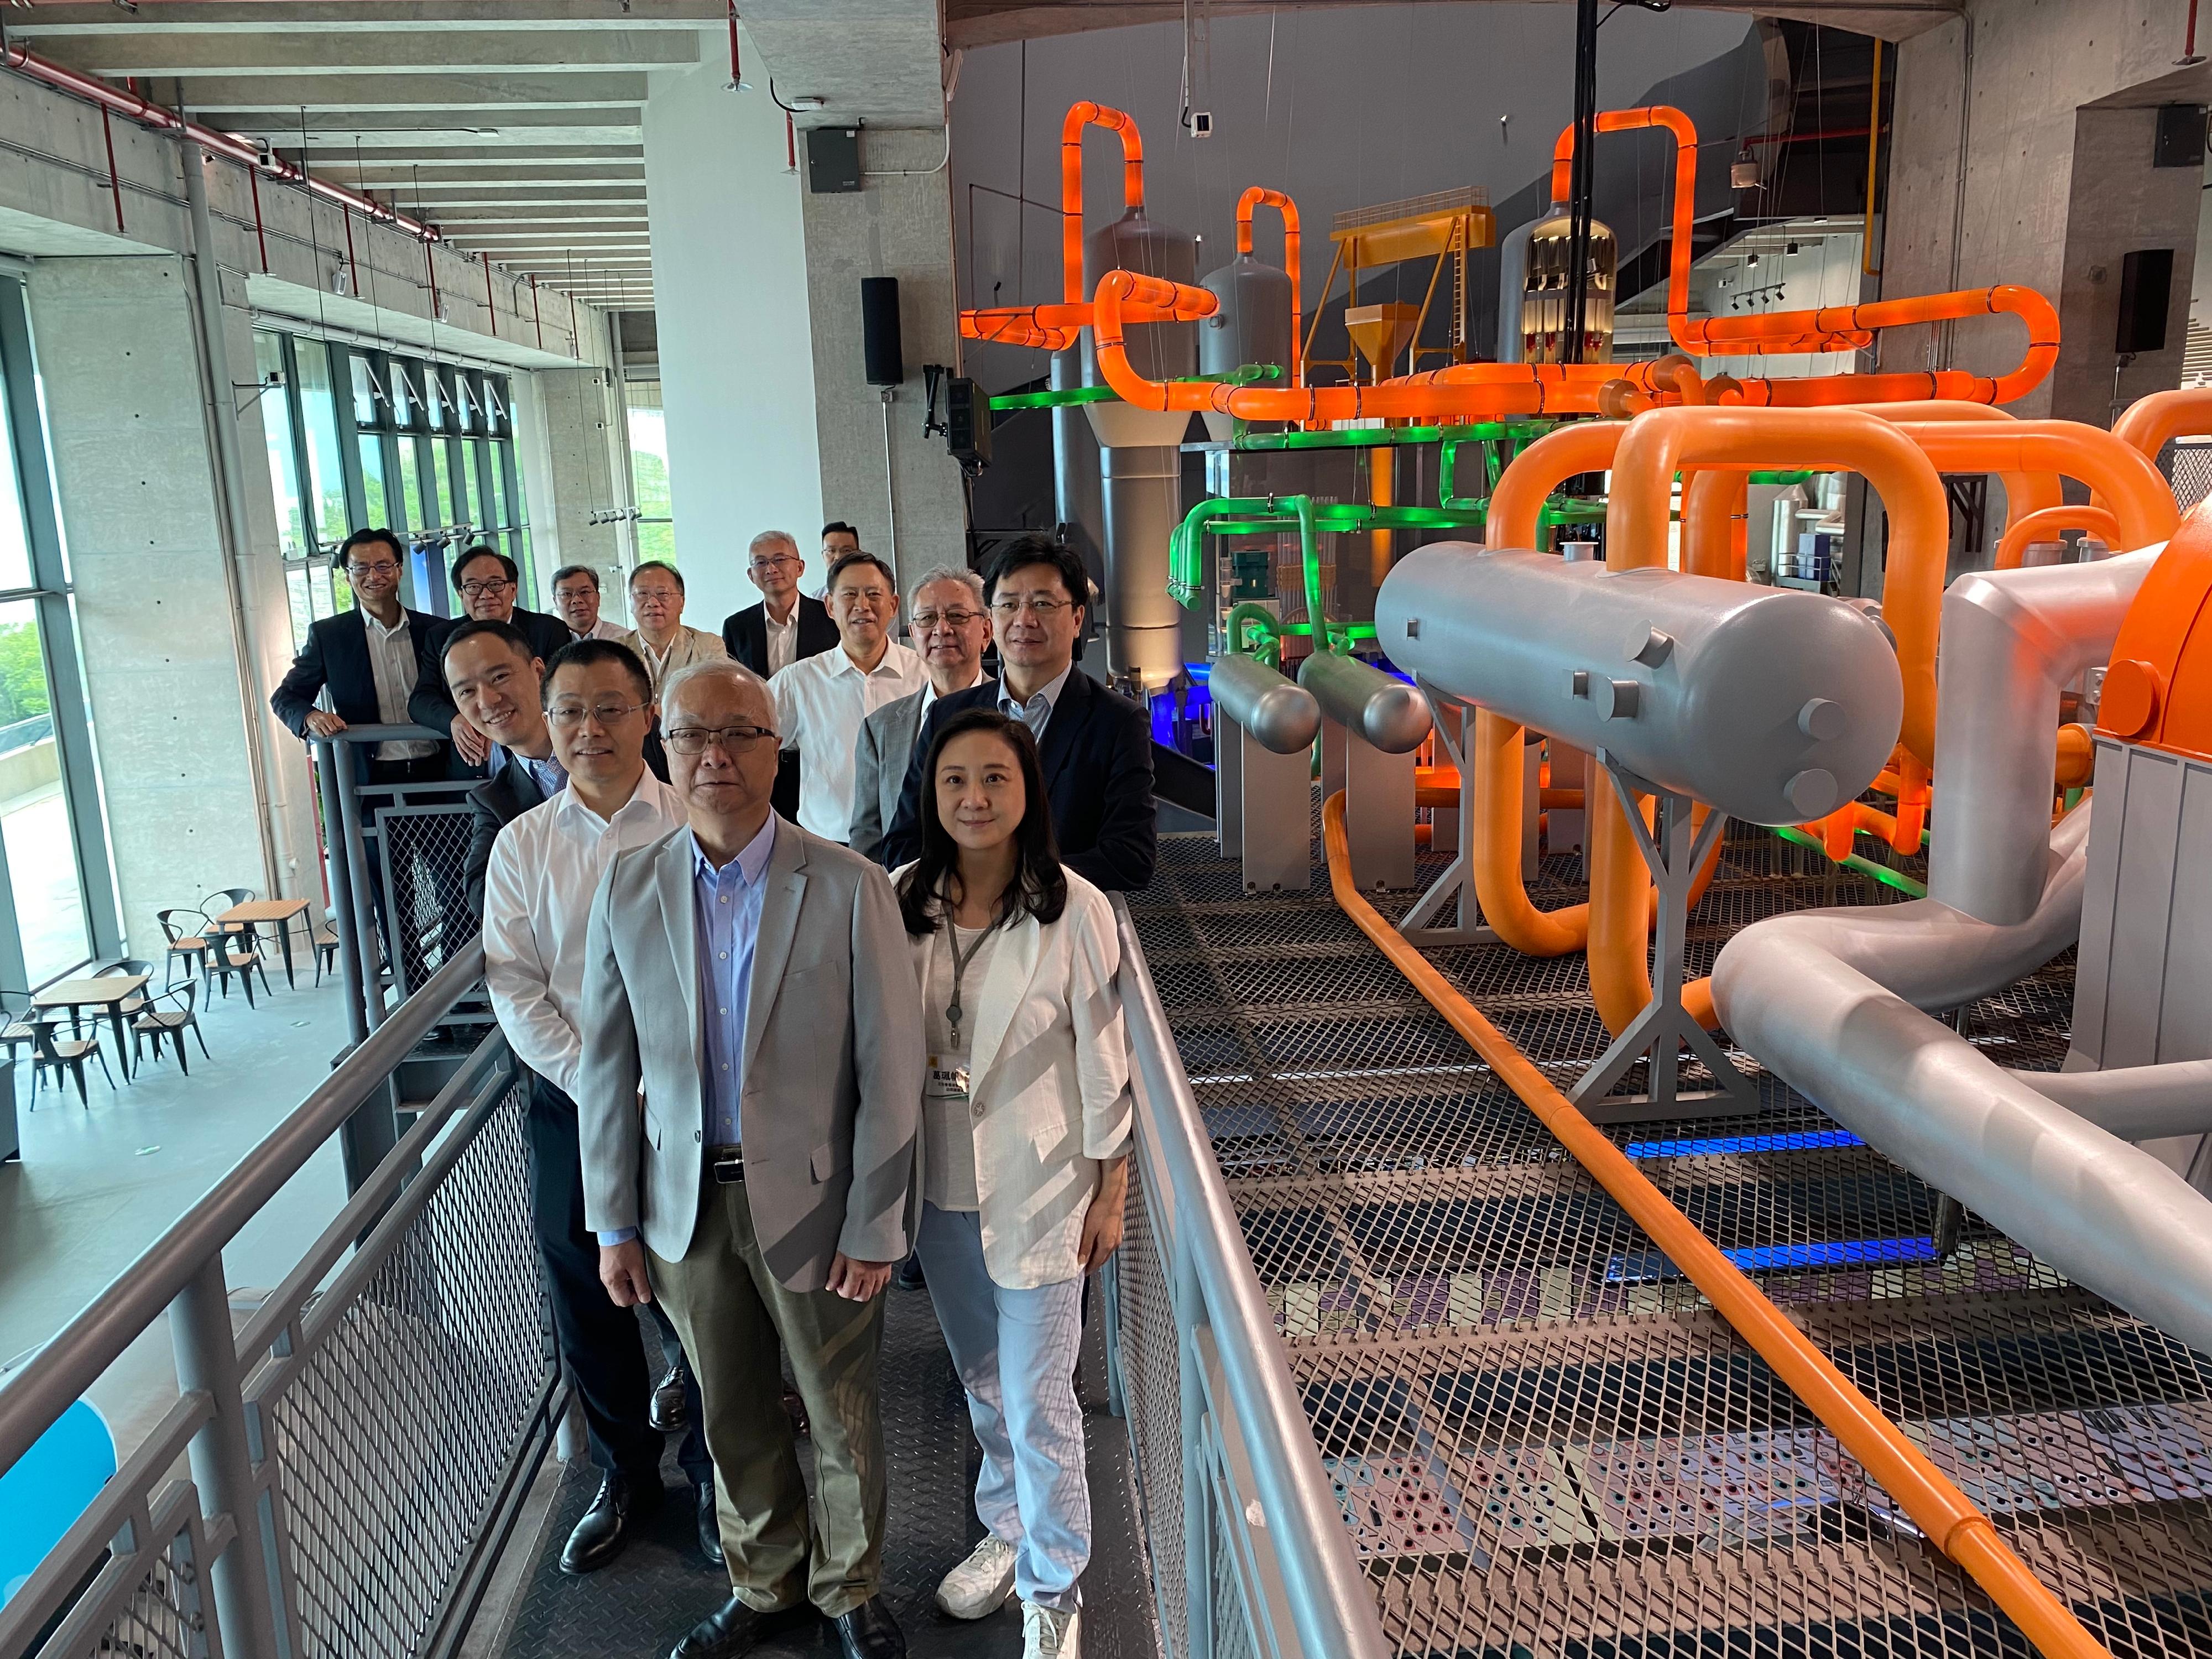 The Secretary for Environment and Ecology, Mr Tse Chin-wan, together with the Legislative Council Panel on Environmental Affairs, today (August 9) visited the Daya Bay Nuclear Power Station in the morning and listened to a briefing on the production of nuclear power and the development of nuclear energy technology in the Mainland. Photo shows Mr Tse (first row, first left) with the delegation of the Legislative Council Panel on Environmental Affairs, the President of the China General Nuclear Power Corporation Limited, Mr Gao Ligang (second row, first left), and the Managing Director of CLP Power, Mr Joseph Law (third row, first left) at the Daya Bay Nuclear Power Science and Technology Museum.